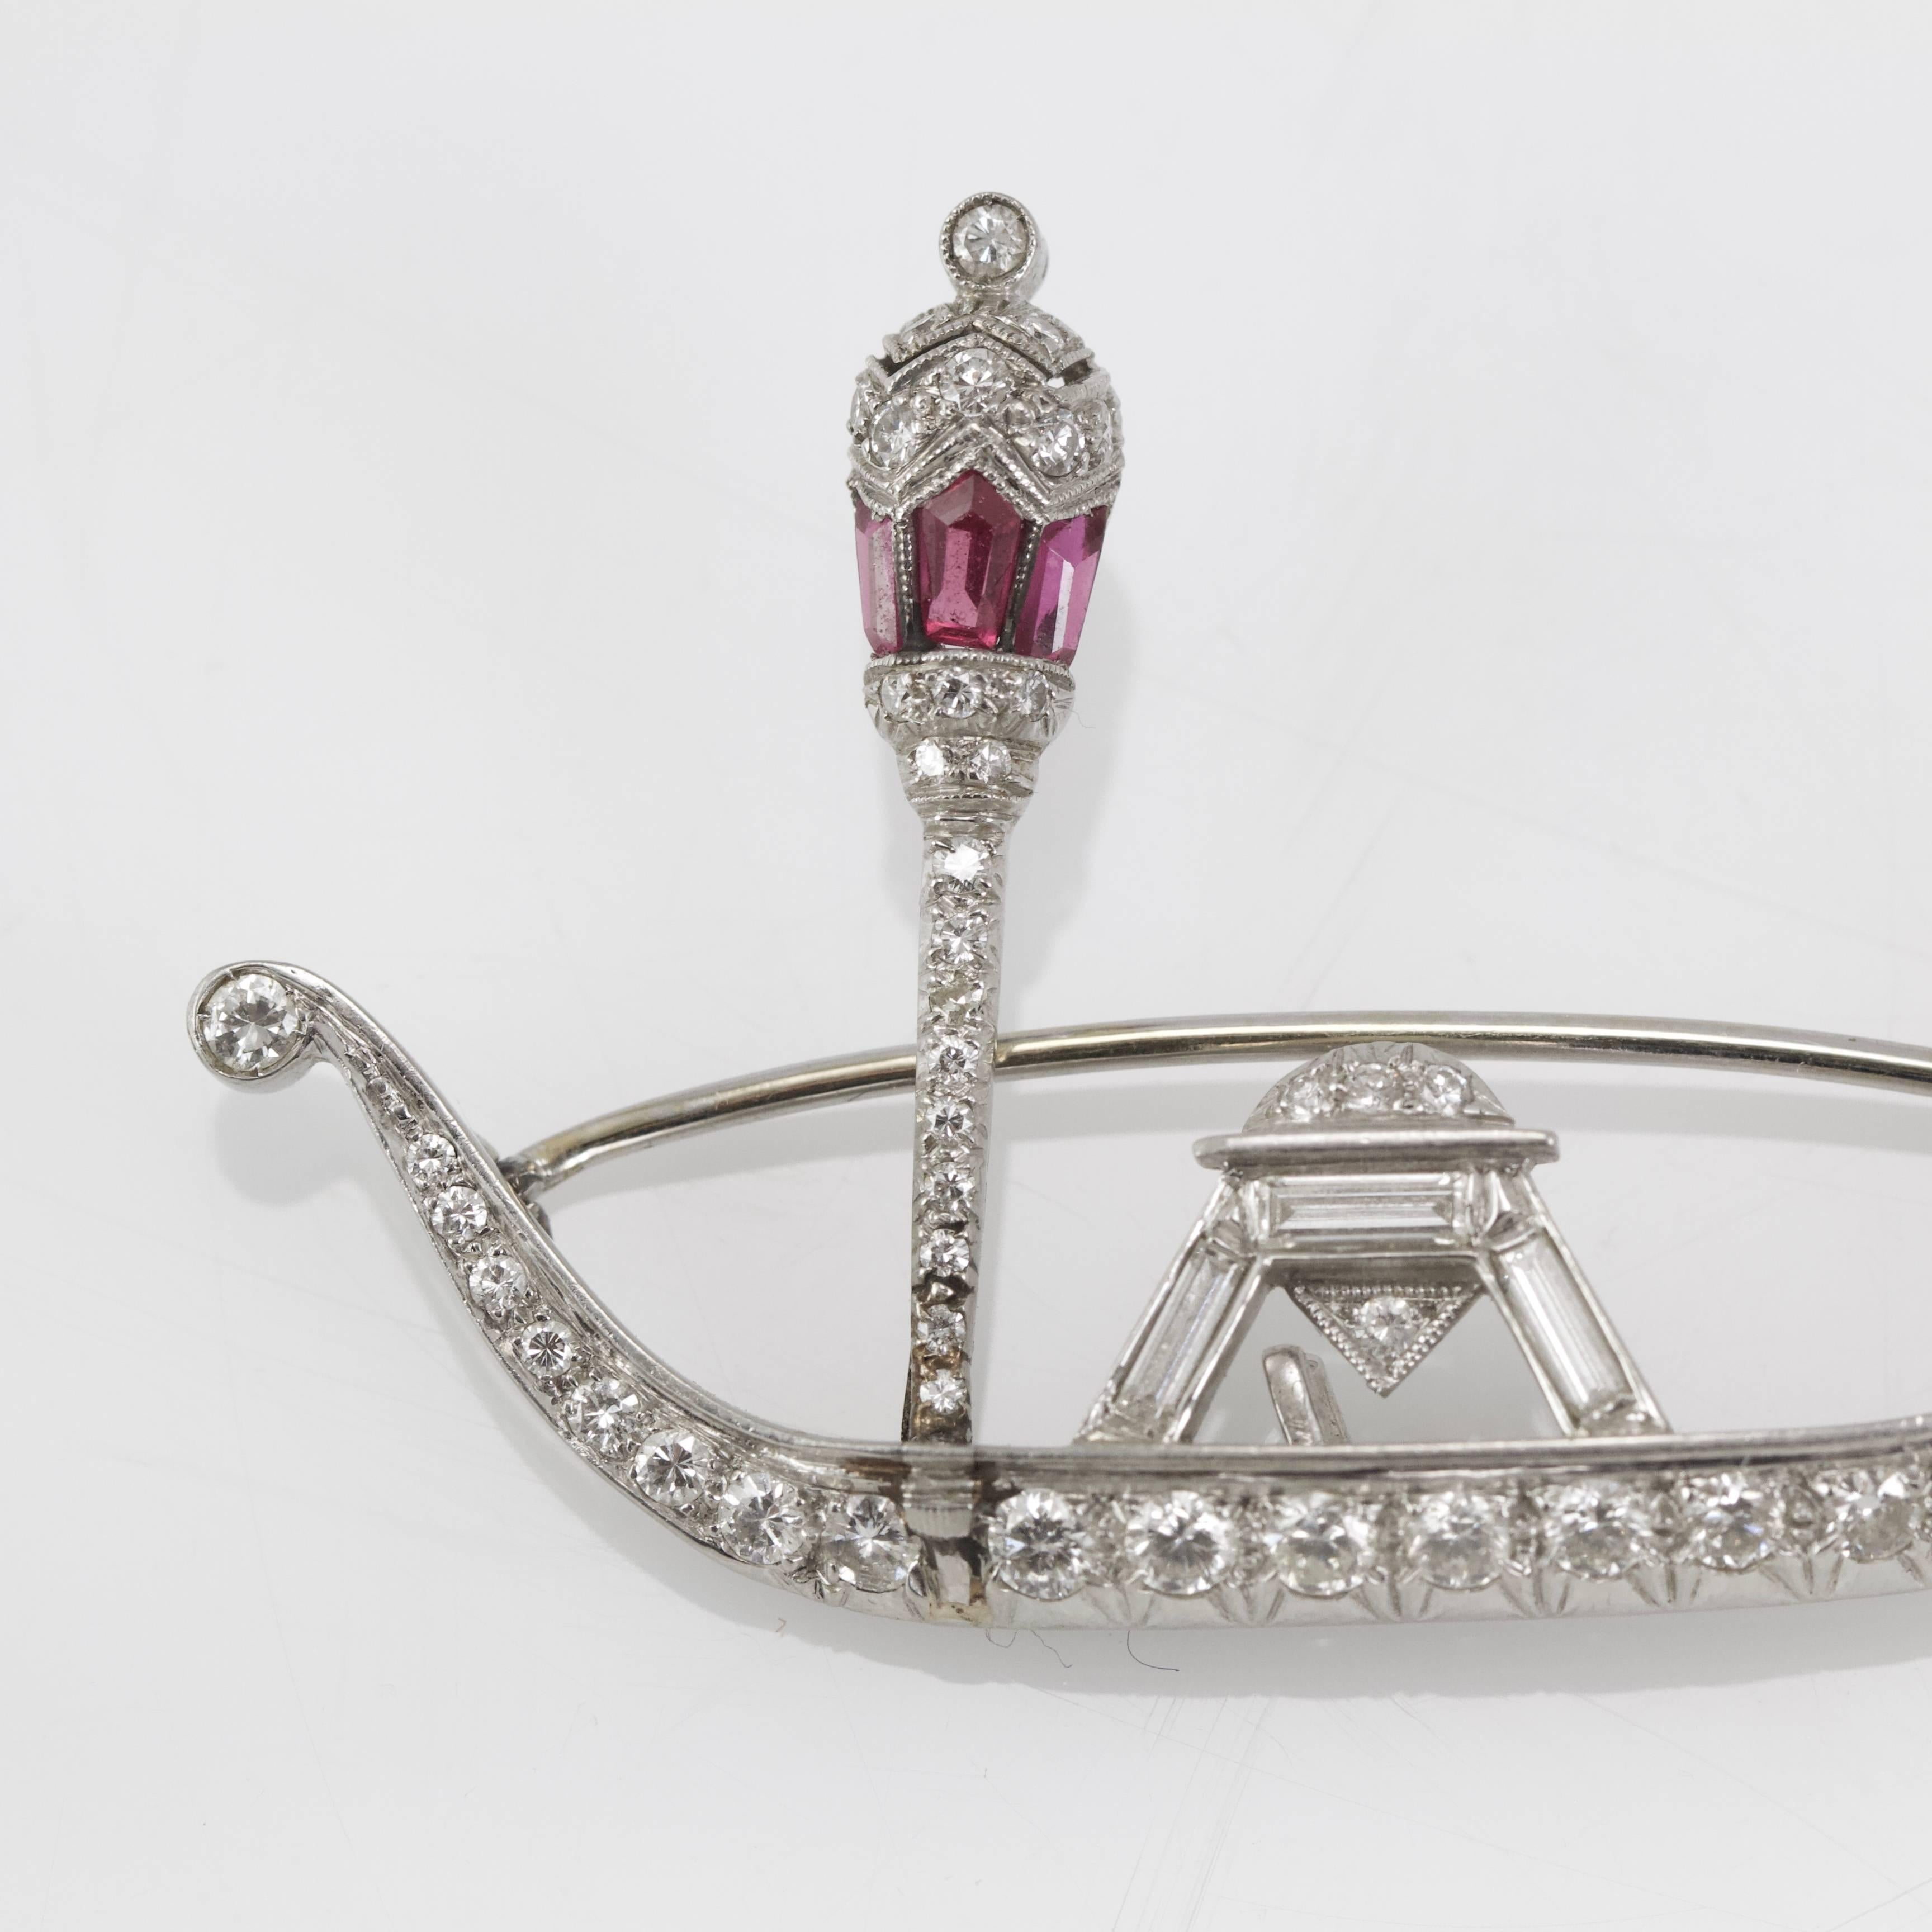 Delicate diamond and ruby brooch shaped as a venitian gondole. 
Set with round and baguette diamonds. Lantern set with three calibré ruby. 
Probably restored at the foot of lantern.  
Made around 1925. 
French recense marks for platinum and gold. 